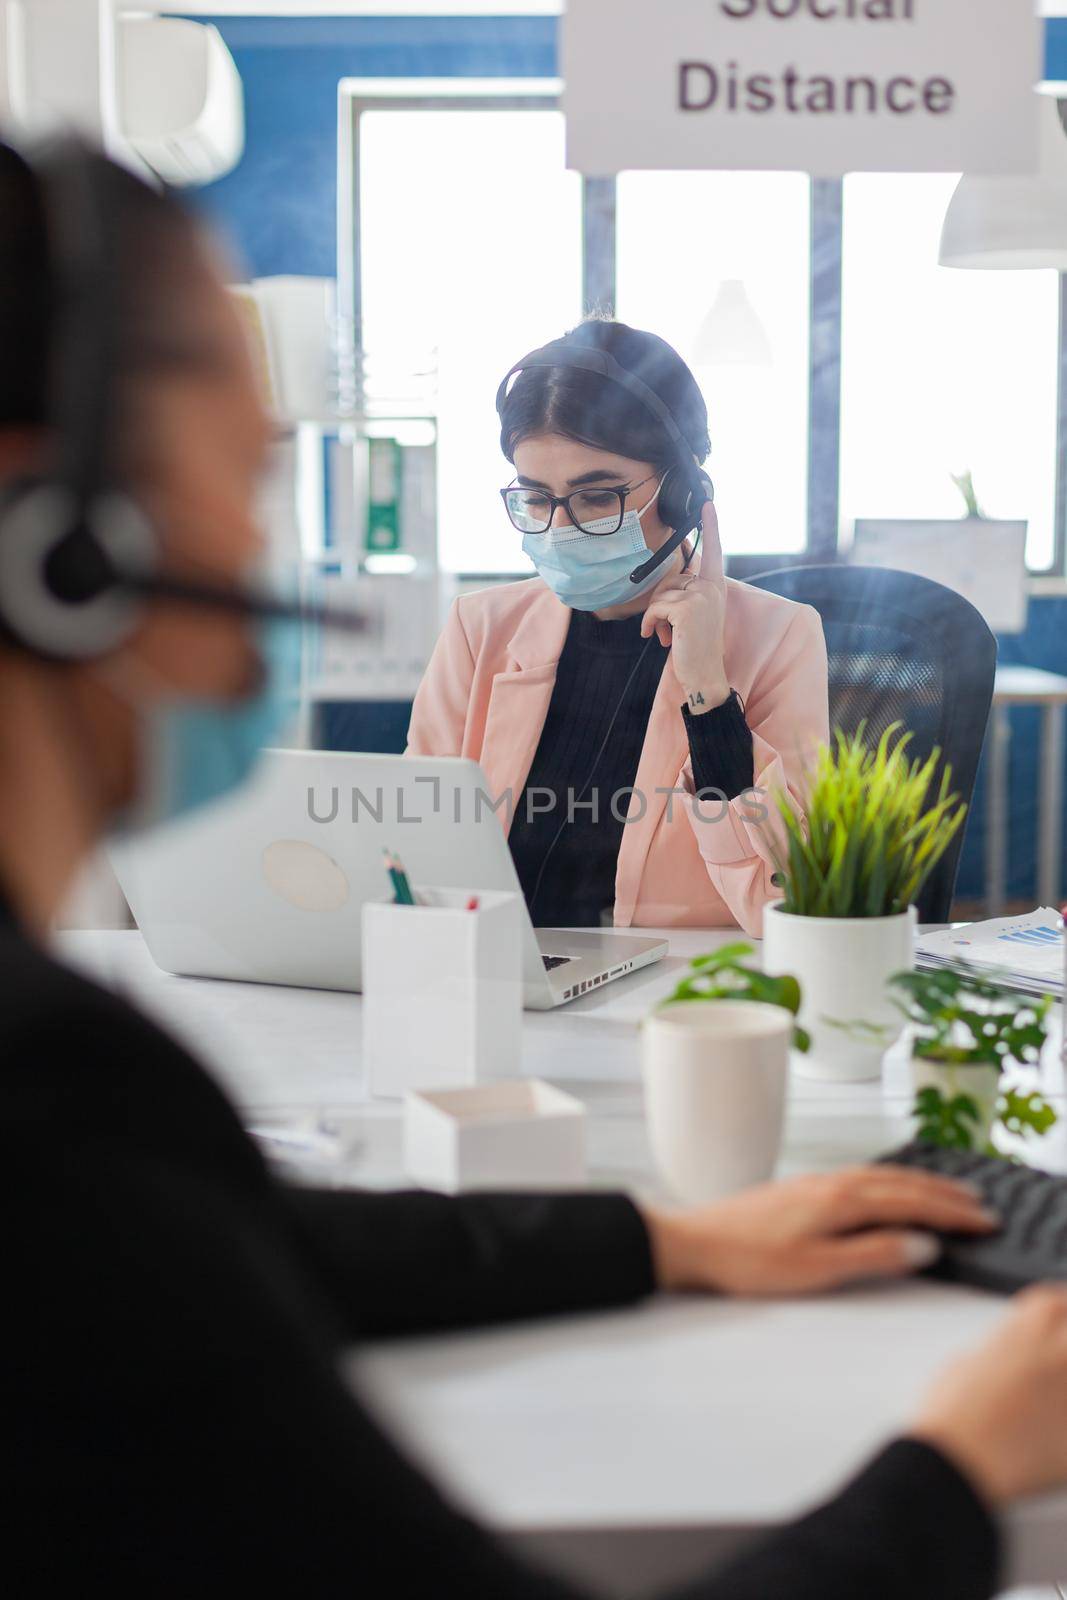 Business workers talking with clients using headphones in workplace, wearing face mask as prevention to coronavirus during global pandemic, keeping social distancing with shield.